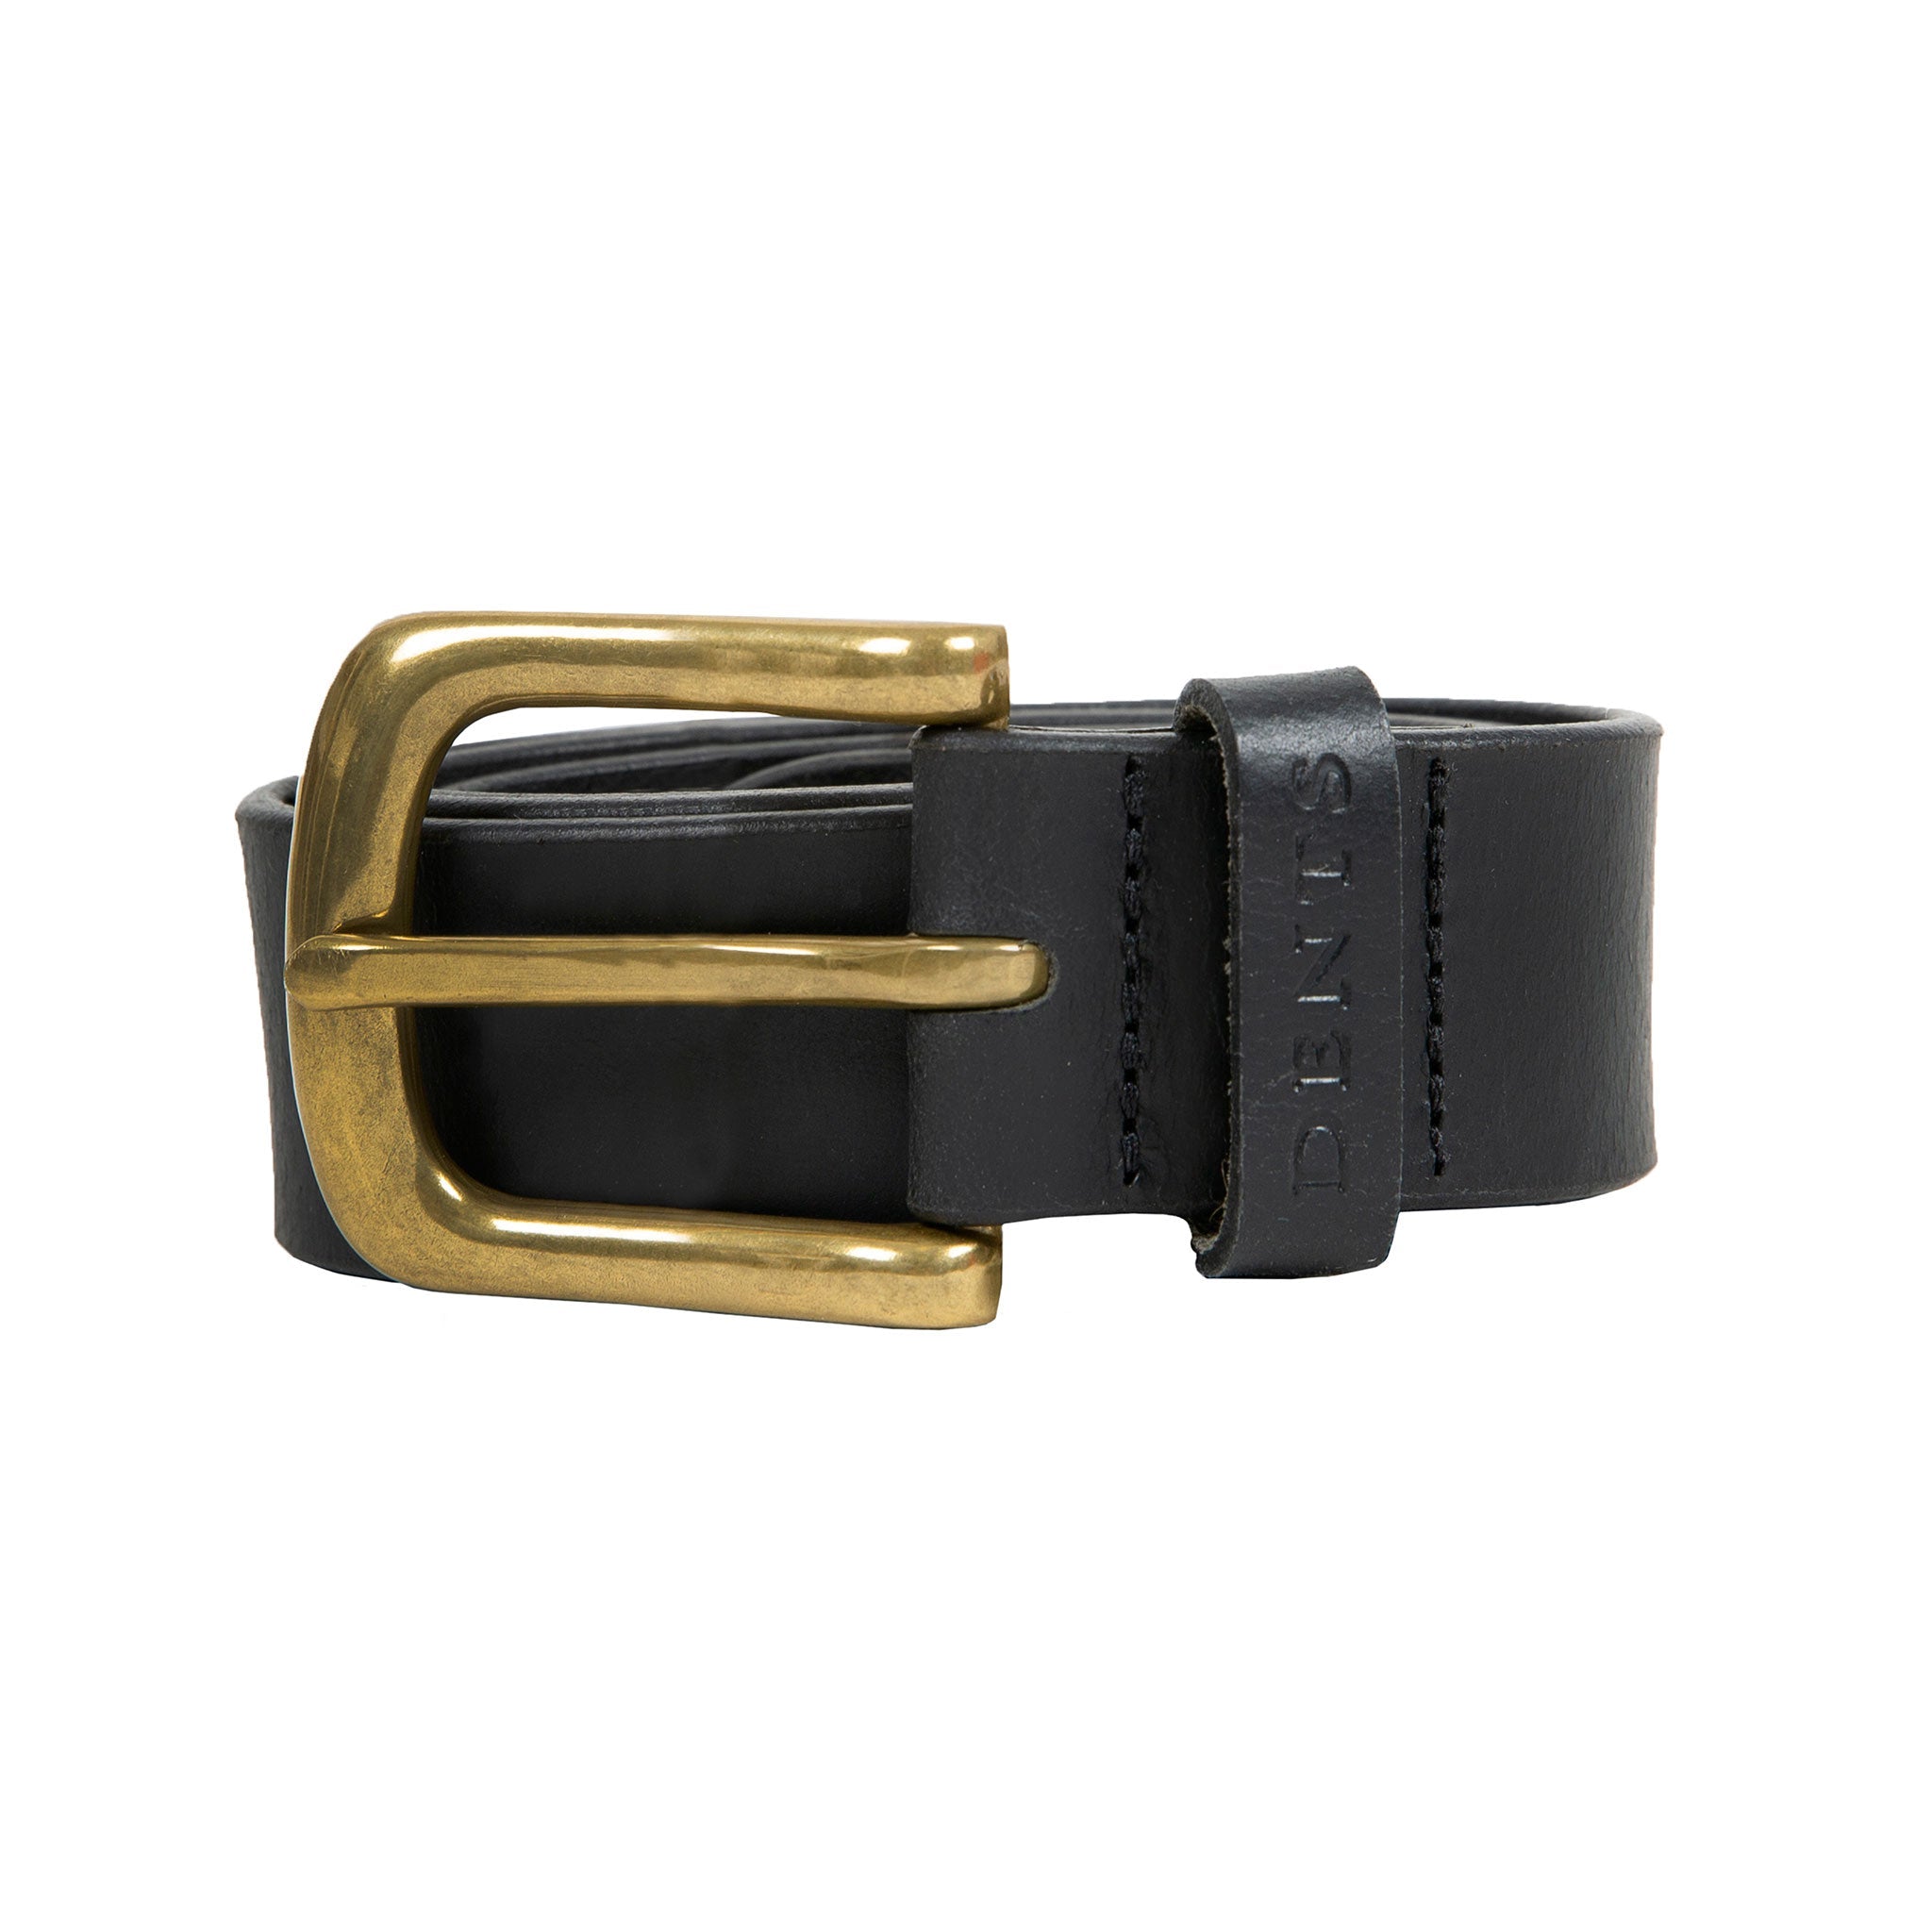 34mm Full Grain Real Leather Belt with Brass Colour Buckle - Black